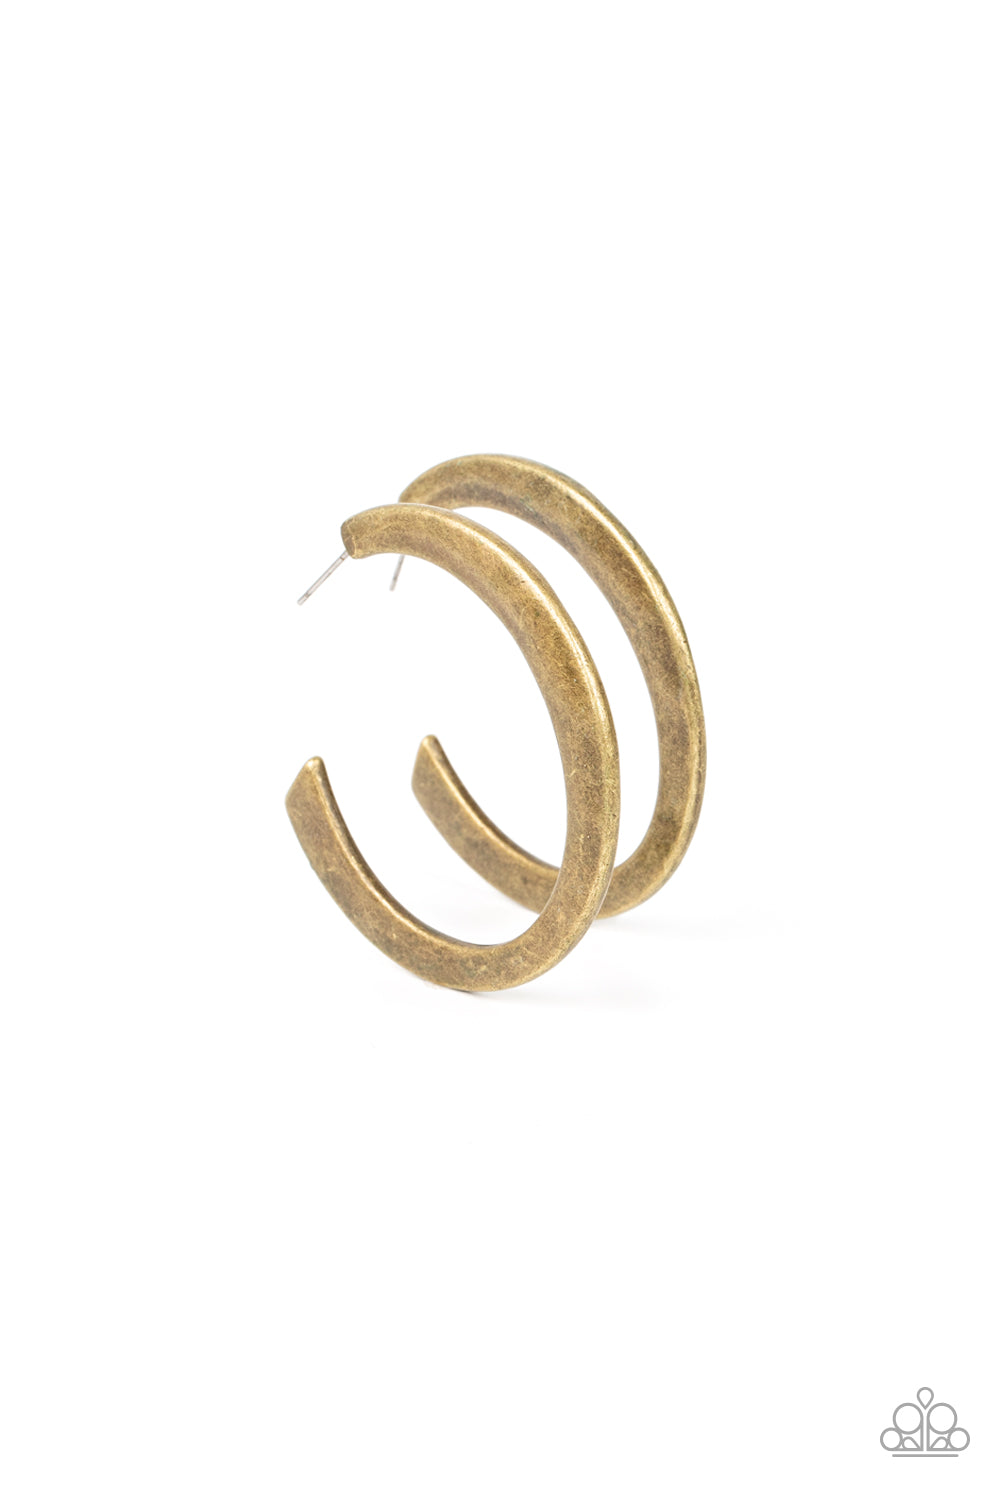 Learning Curve - Brass Hoop Earrings - Paparazzi Accessories - Hammered in a burnished finish, a flat brass bar curls into an asymmetrical hoop for a rustic flair. Earring attaches to a standard post fitting. Hoop measures approximately 1 3/4" in diameter. Sold as one pair of hoop earrings.